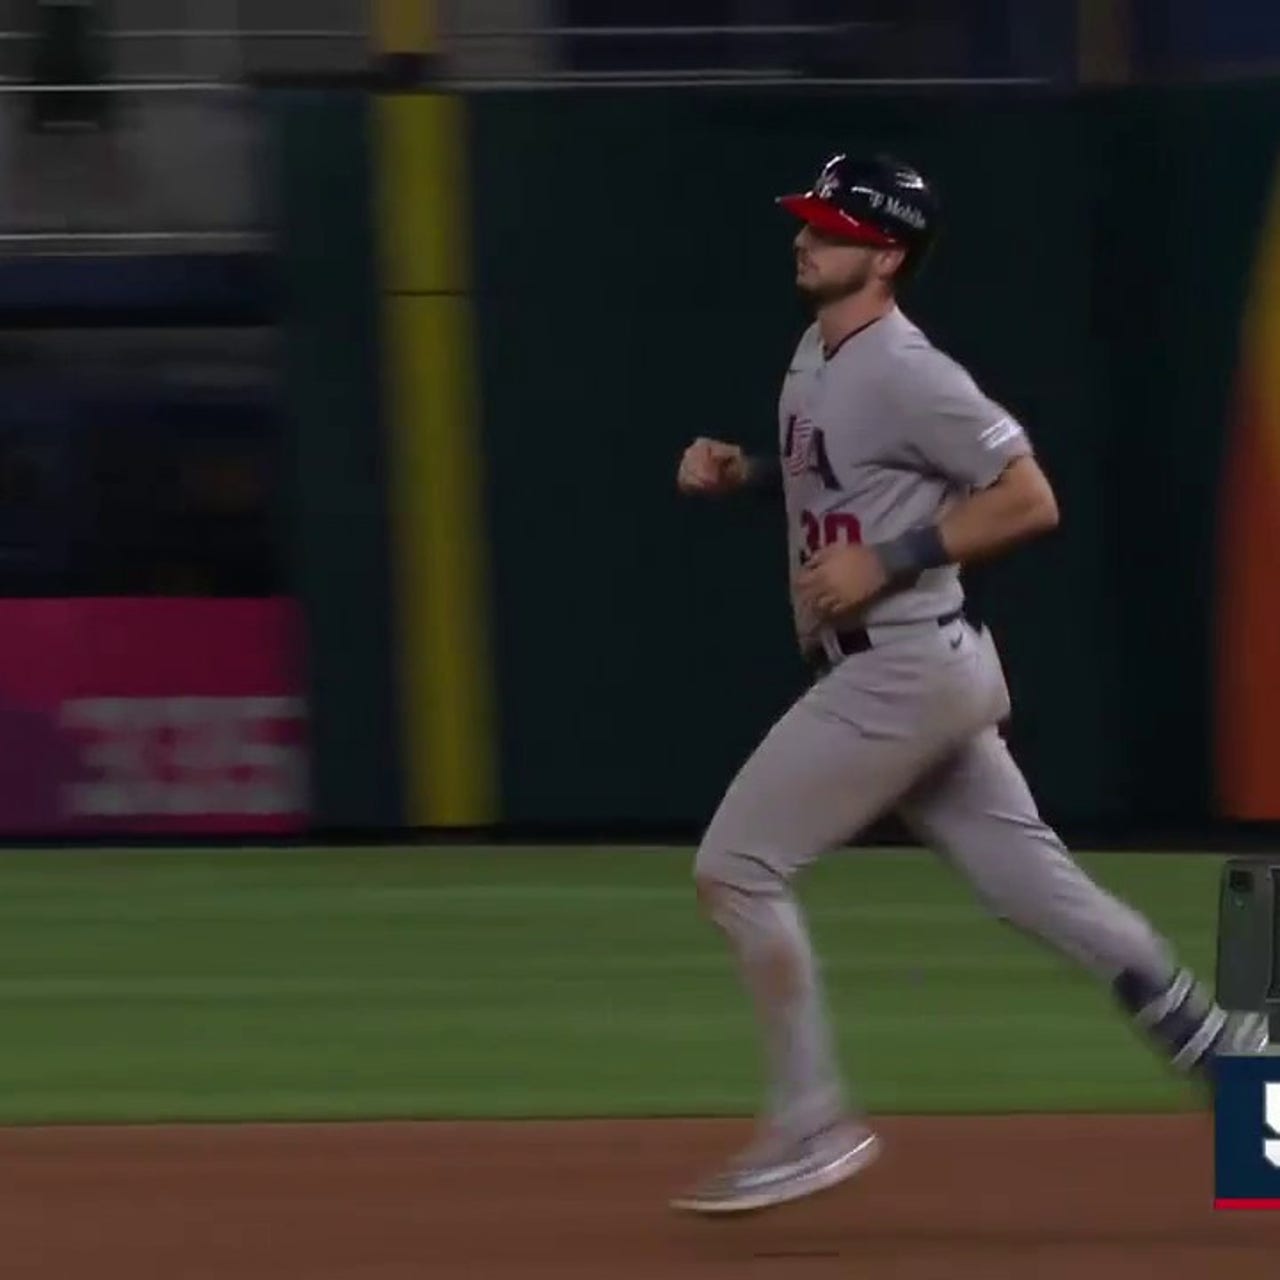 Kyle Tucker launches a solo home run to right, giving the USA a 5-2